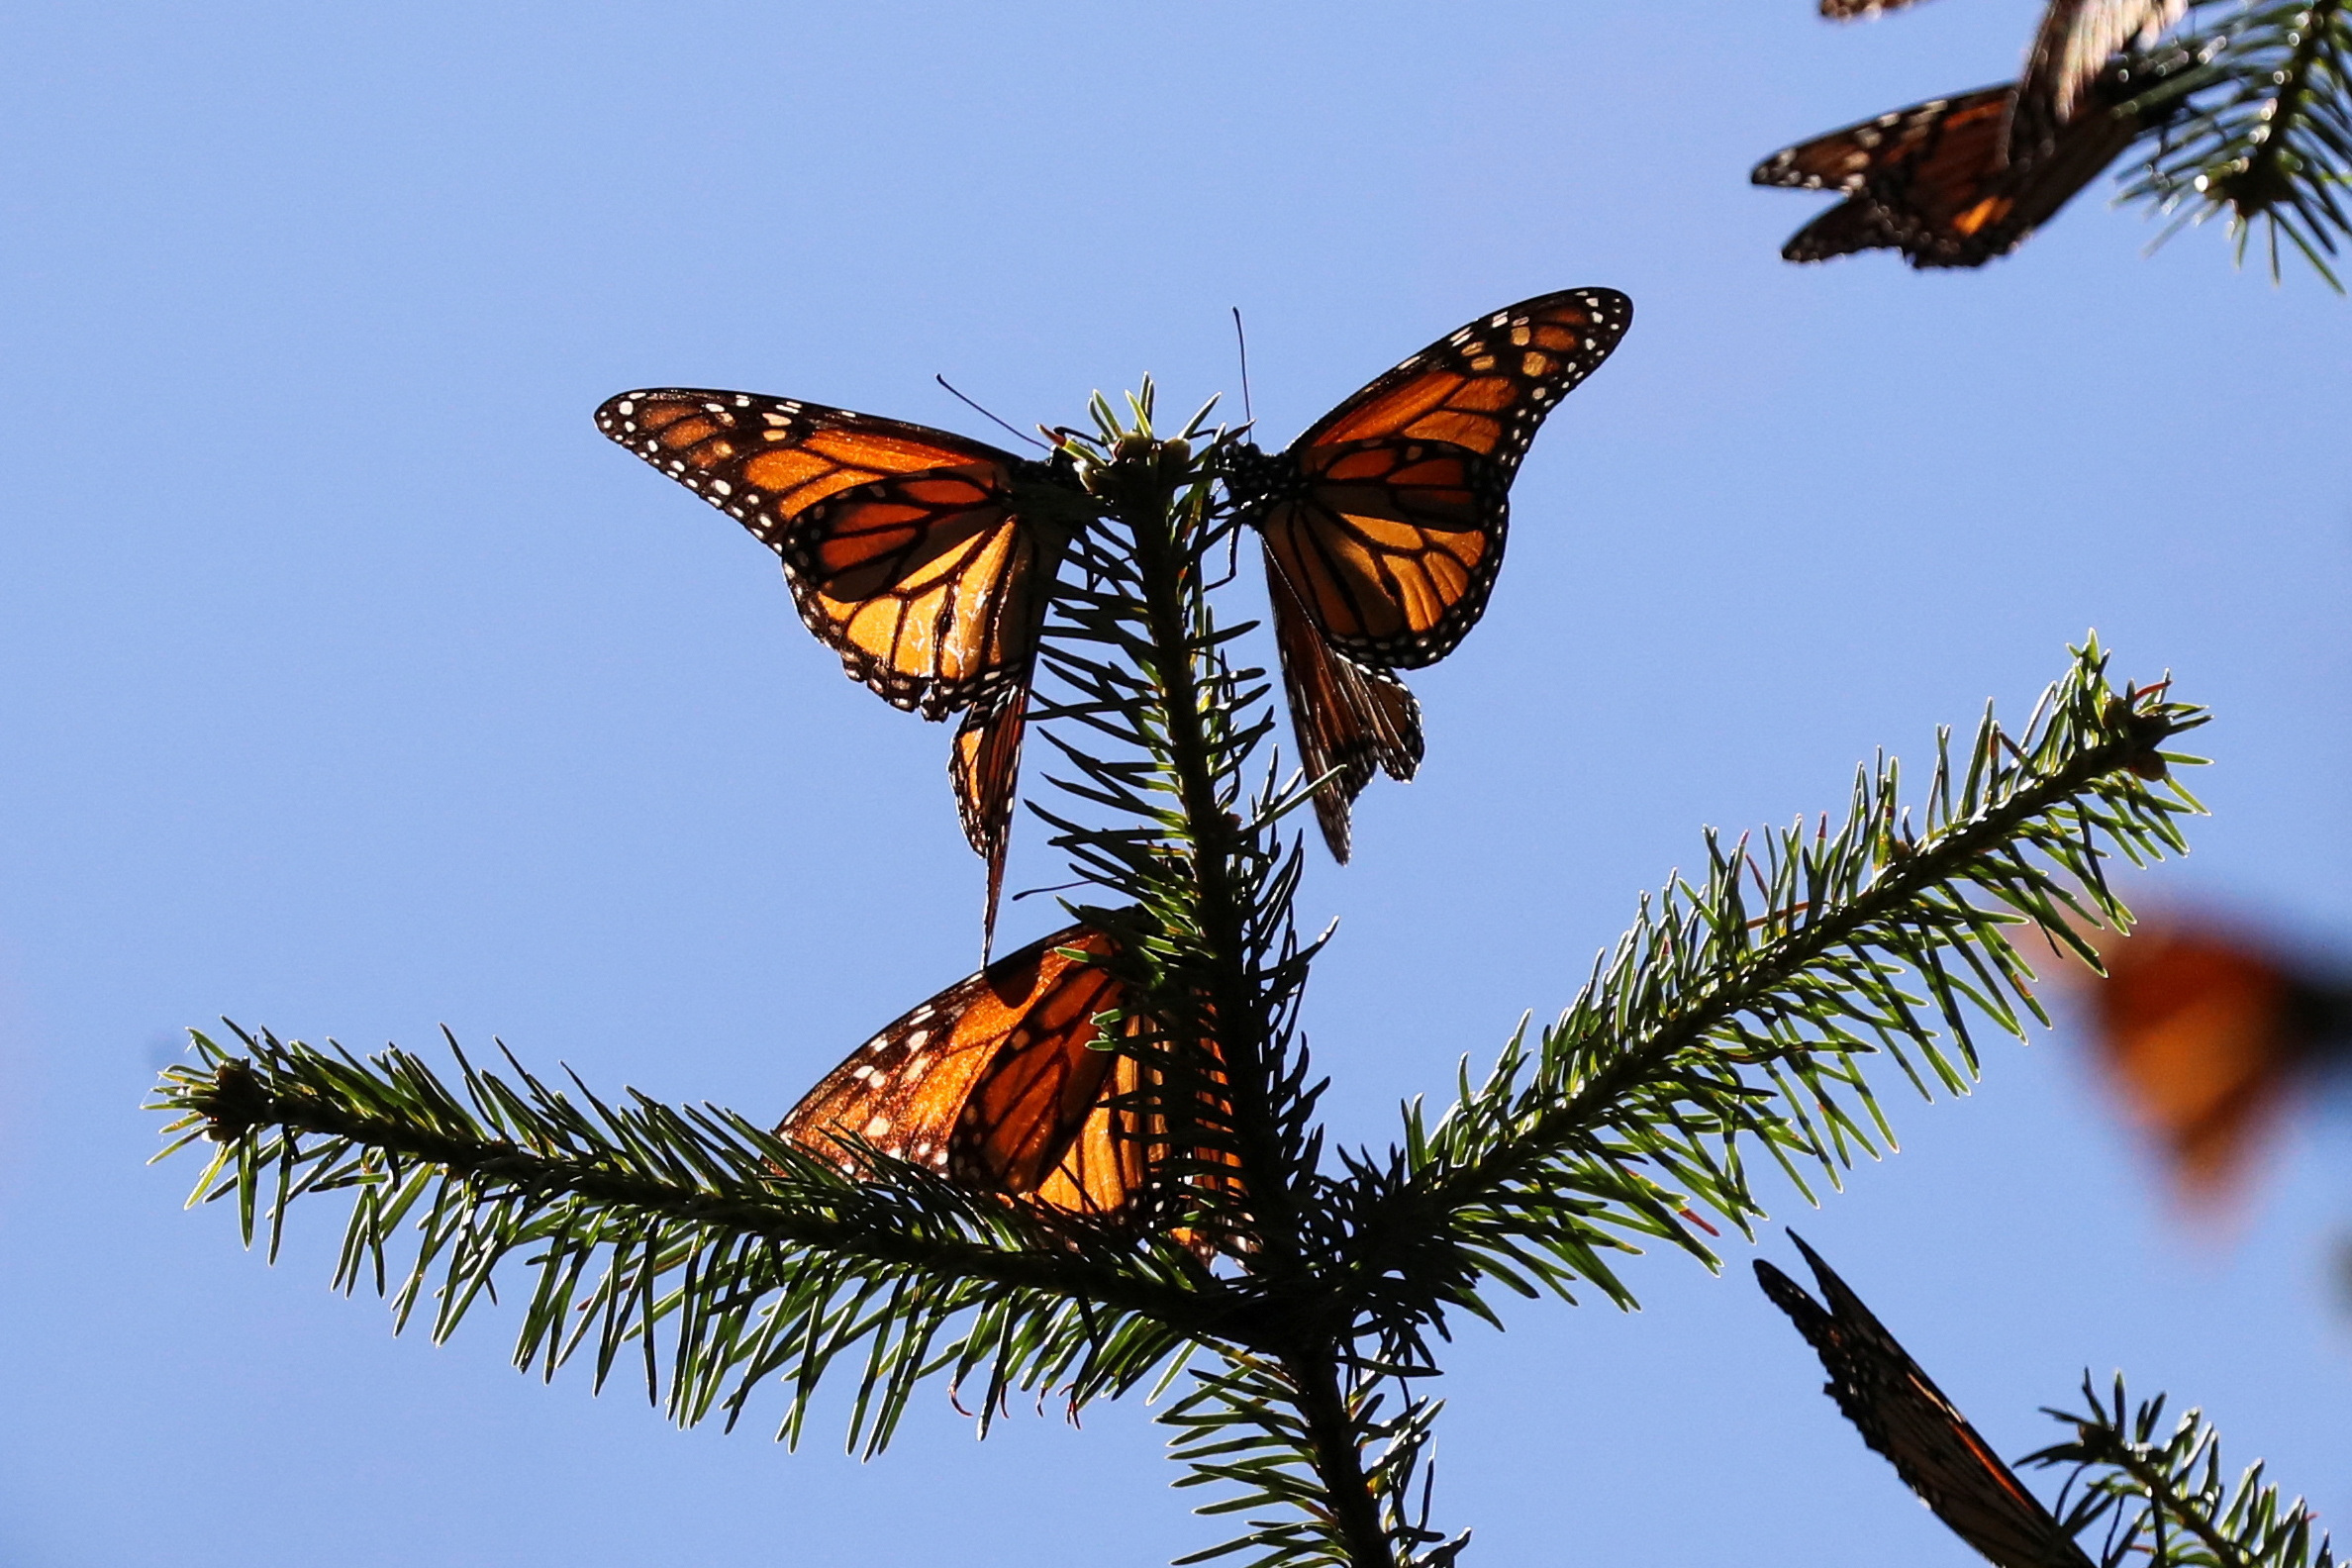 Monarch butterflies at Mexico's Sierra Chincua butterfly sanctuary